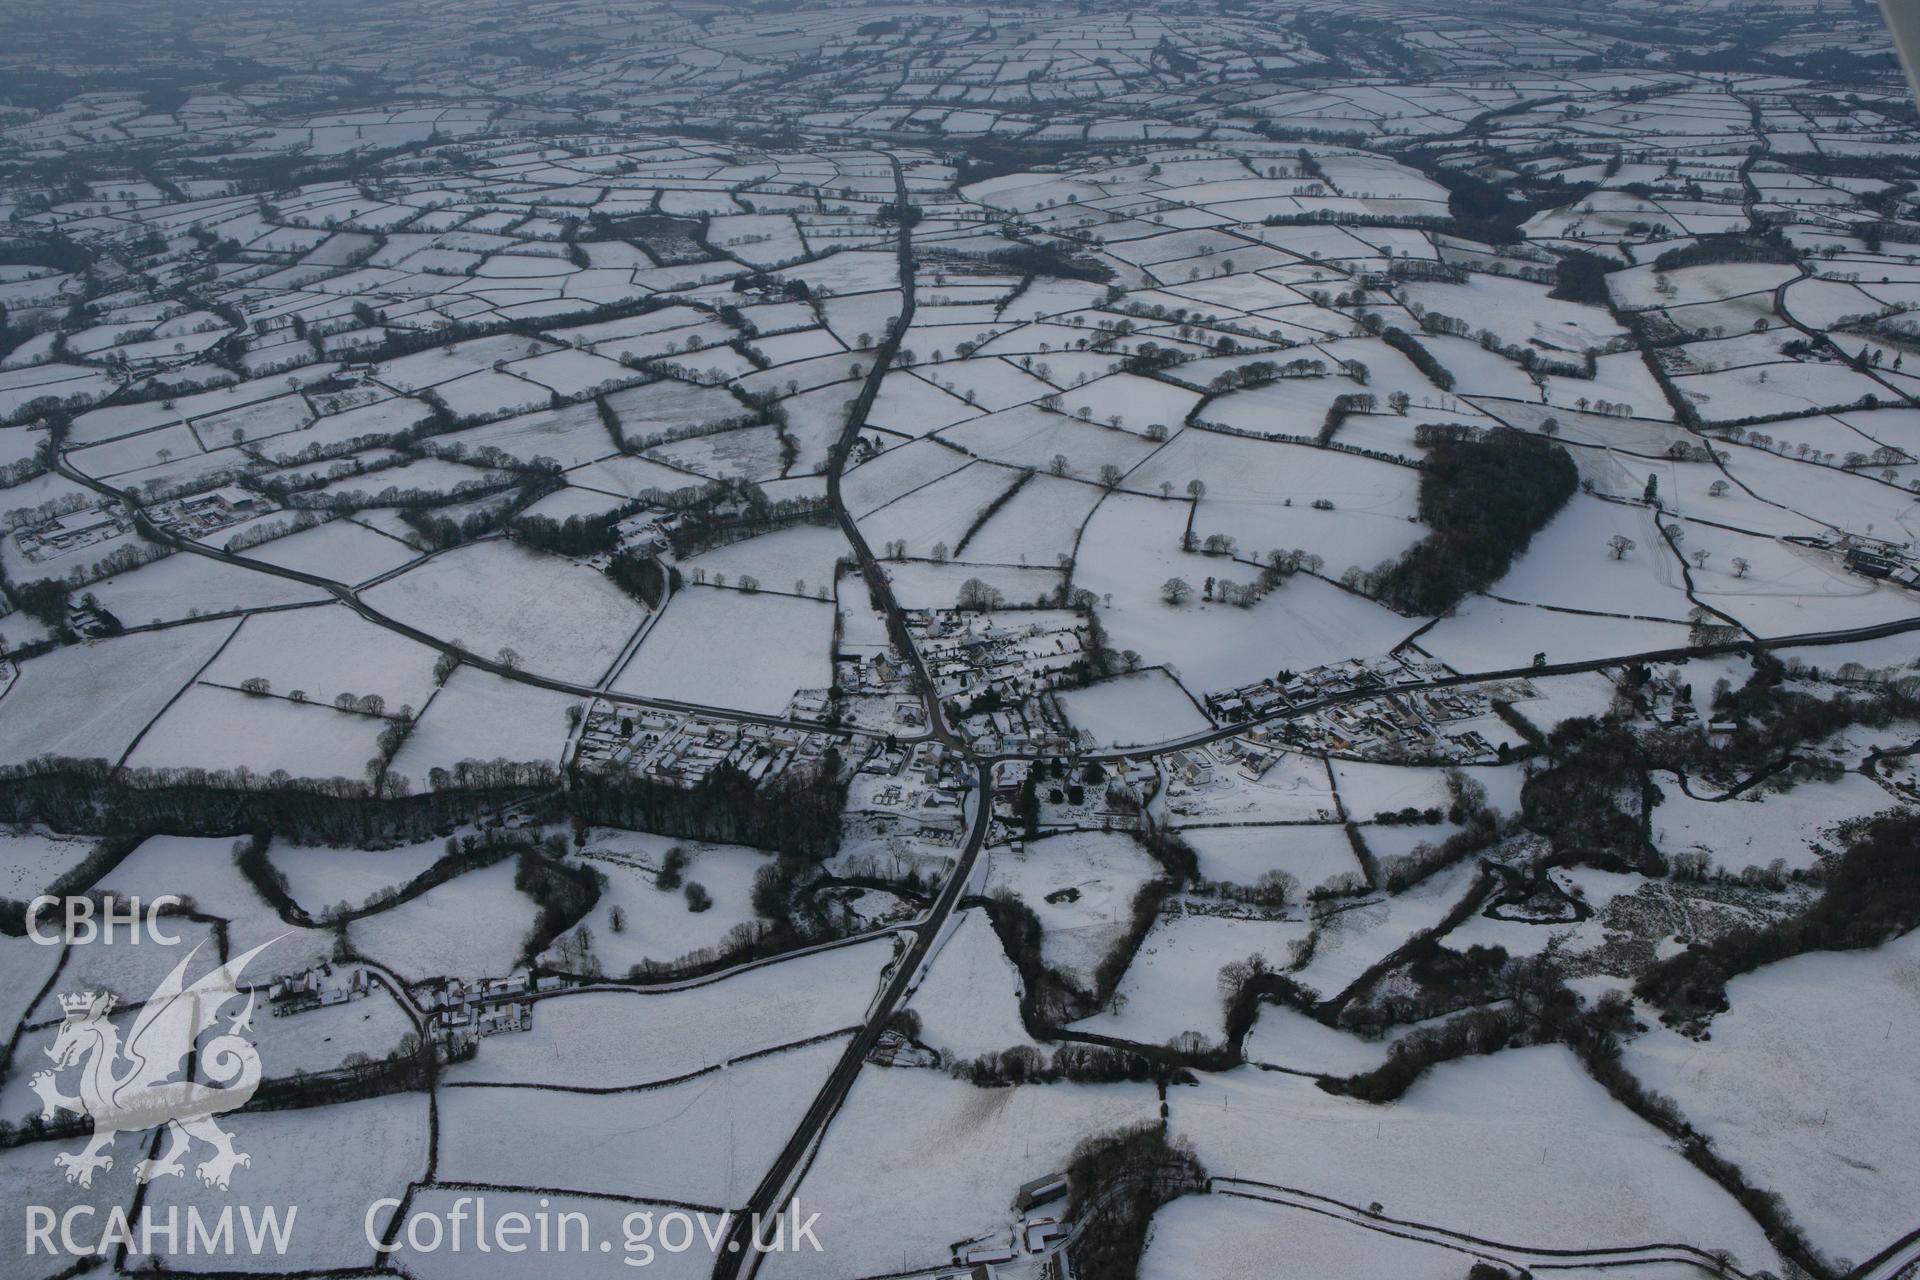 RCAHMW colour oblique photograph of Llanwnnen, view from the east. Taken by Toby Driver on 02/12/2010.